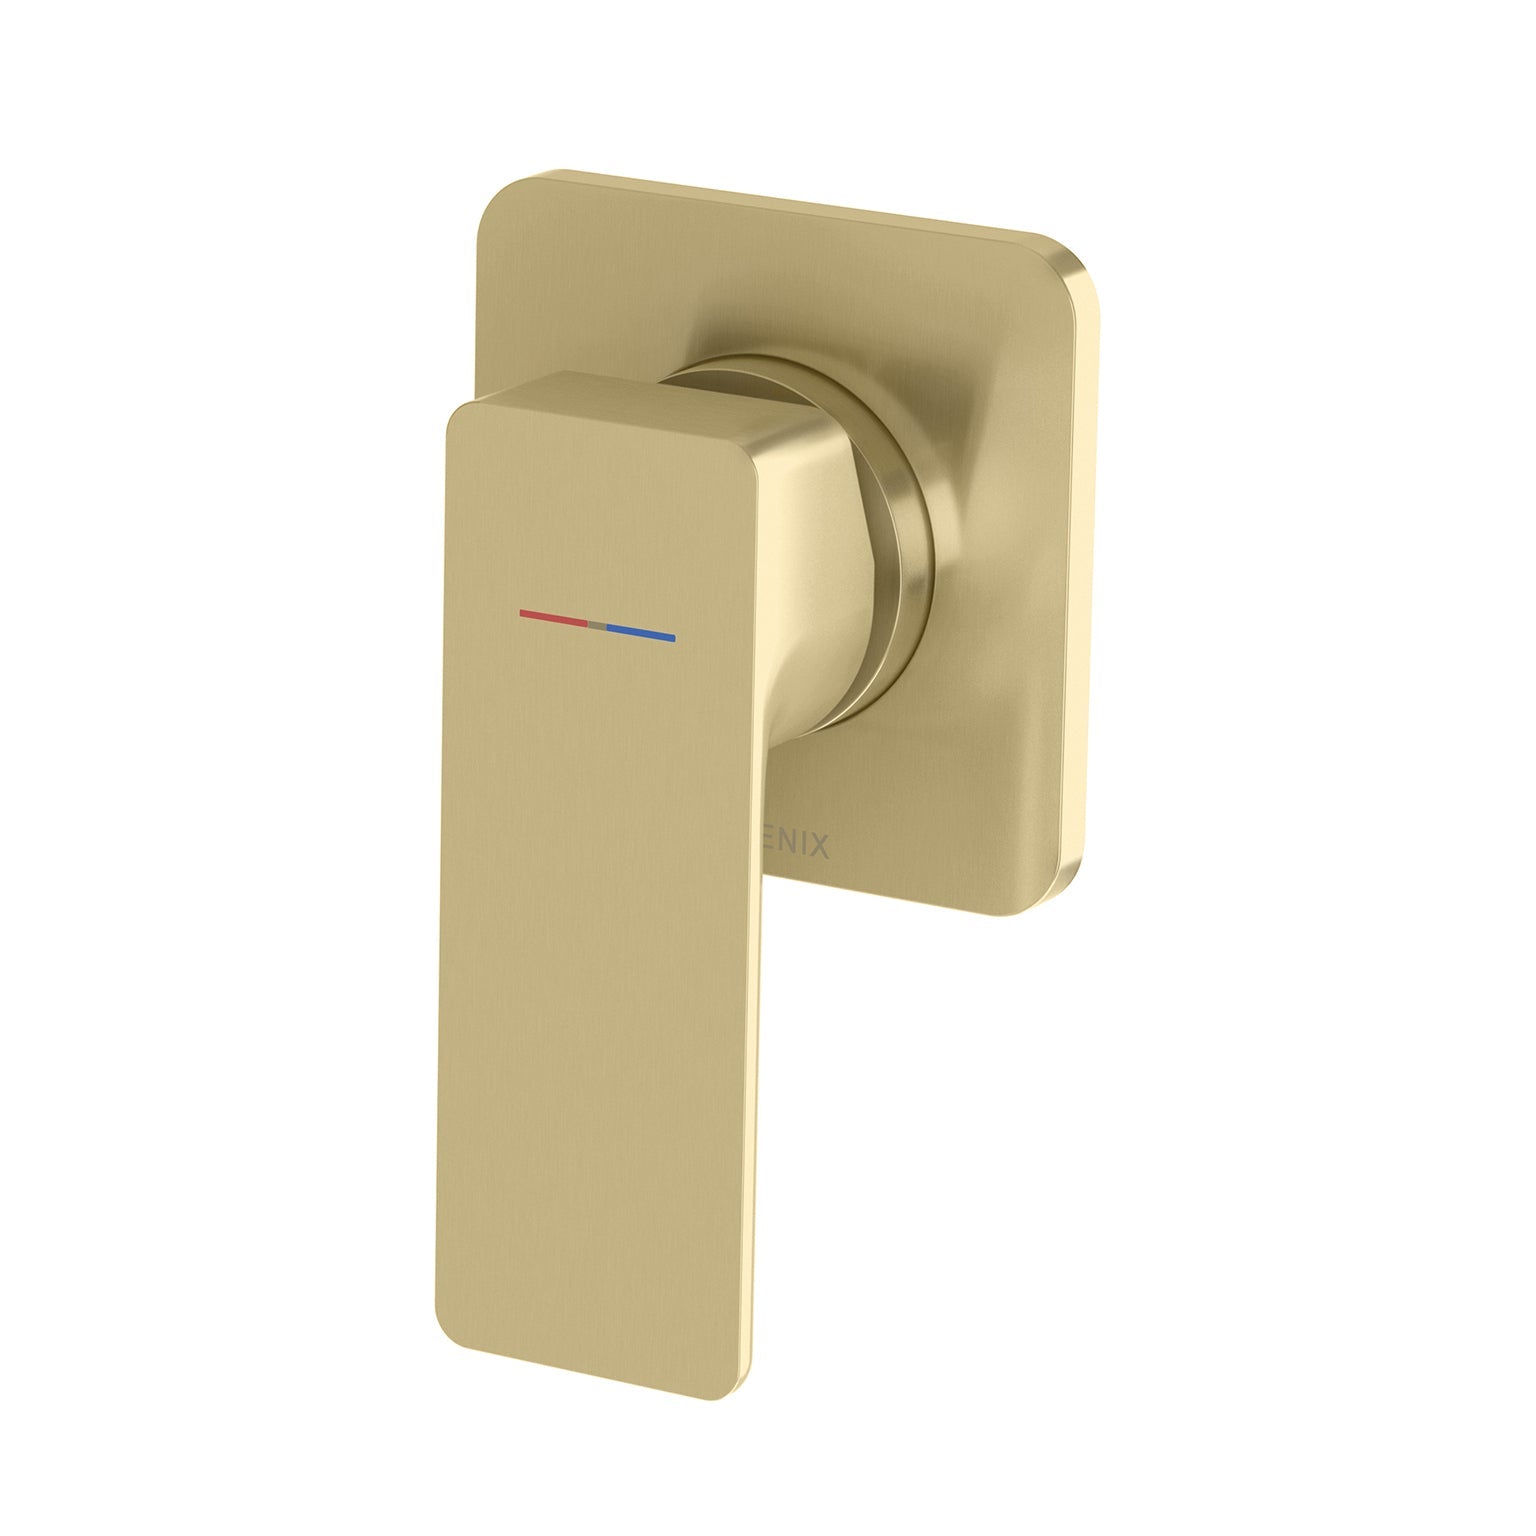 PHOENIX GLOSS MKII SWITCHMIX SHOWER / WALL MIXER FIT-OFF AND ROUGH-IN KIT BRUSHED GOLD